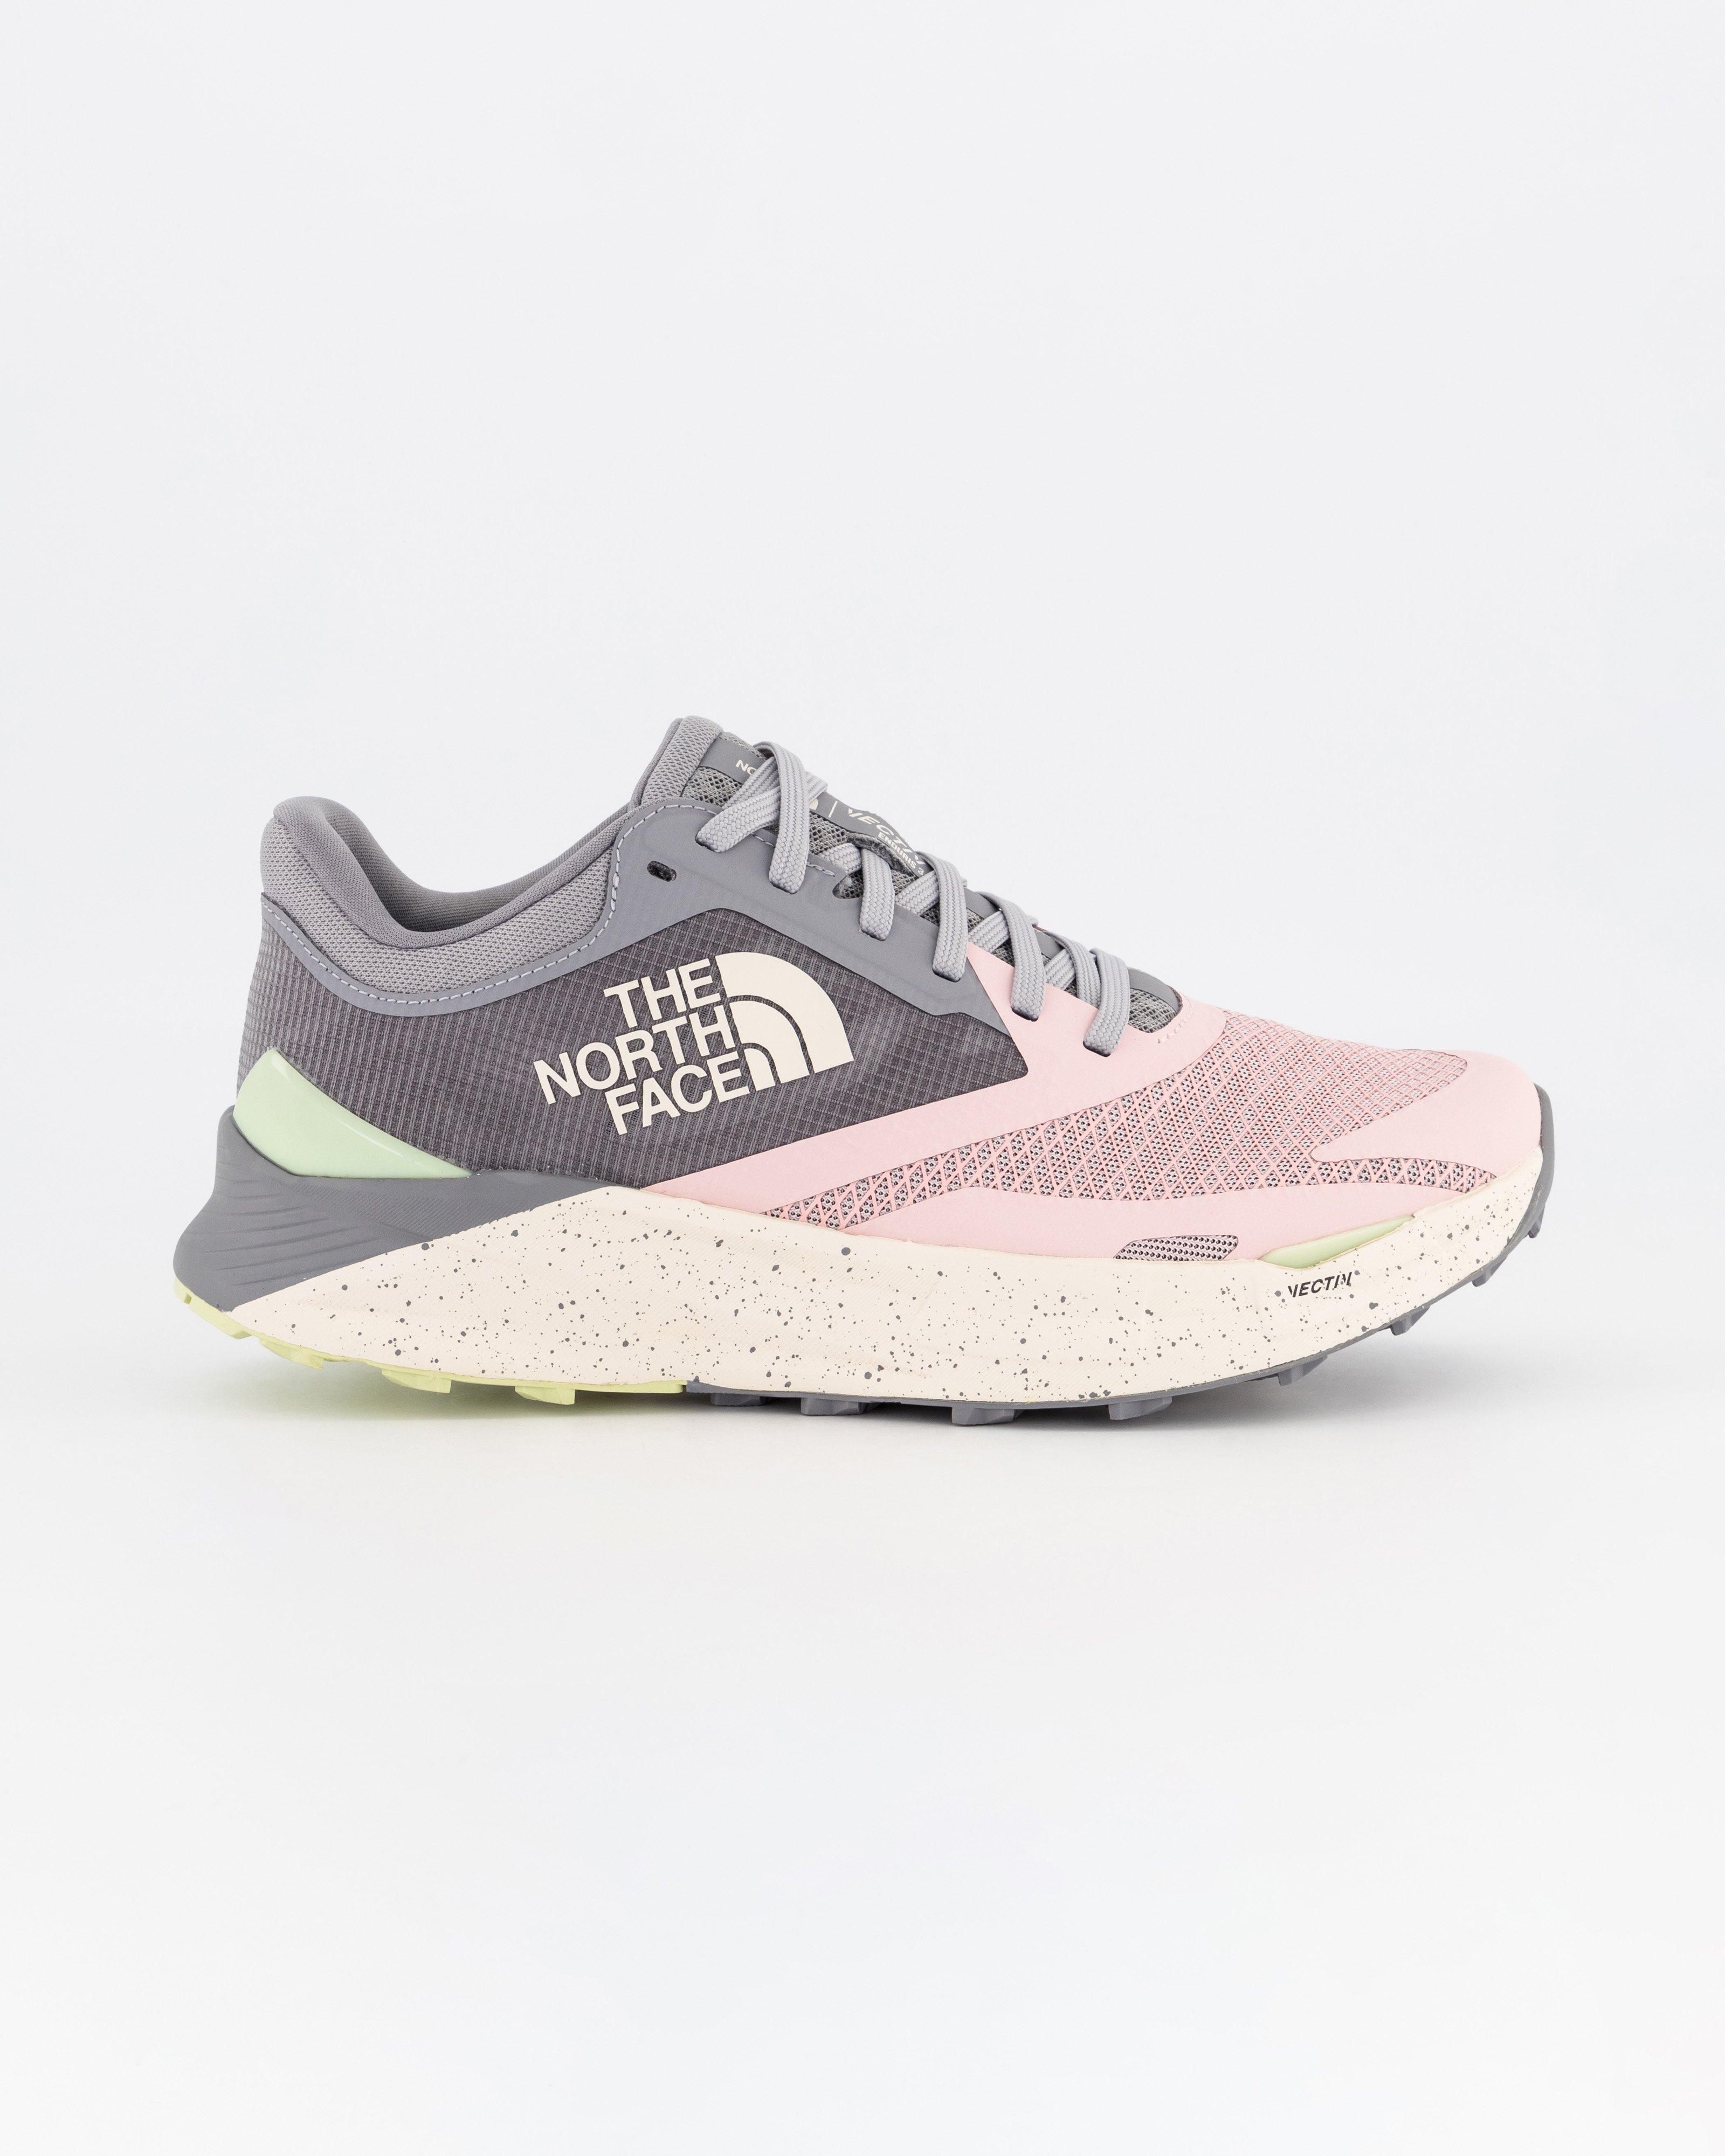 The North Face Women's Vectiv Enduris III Running Shoes | Cape Union Mart